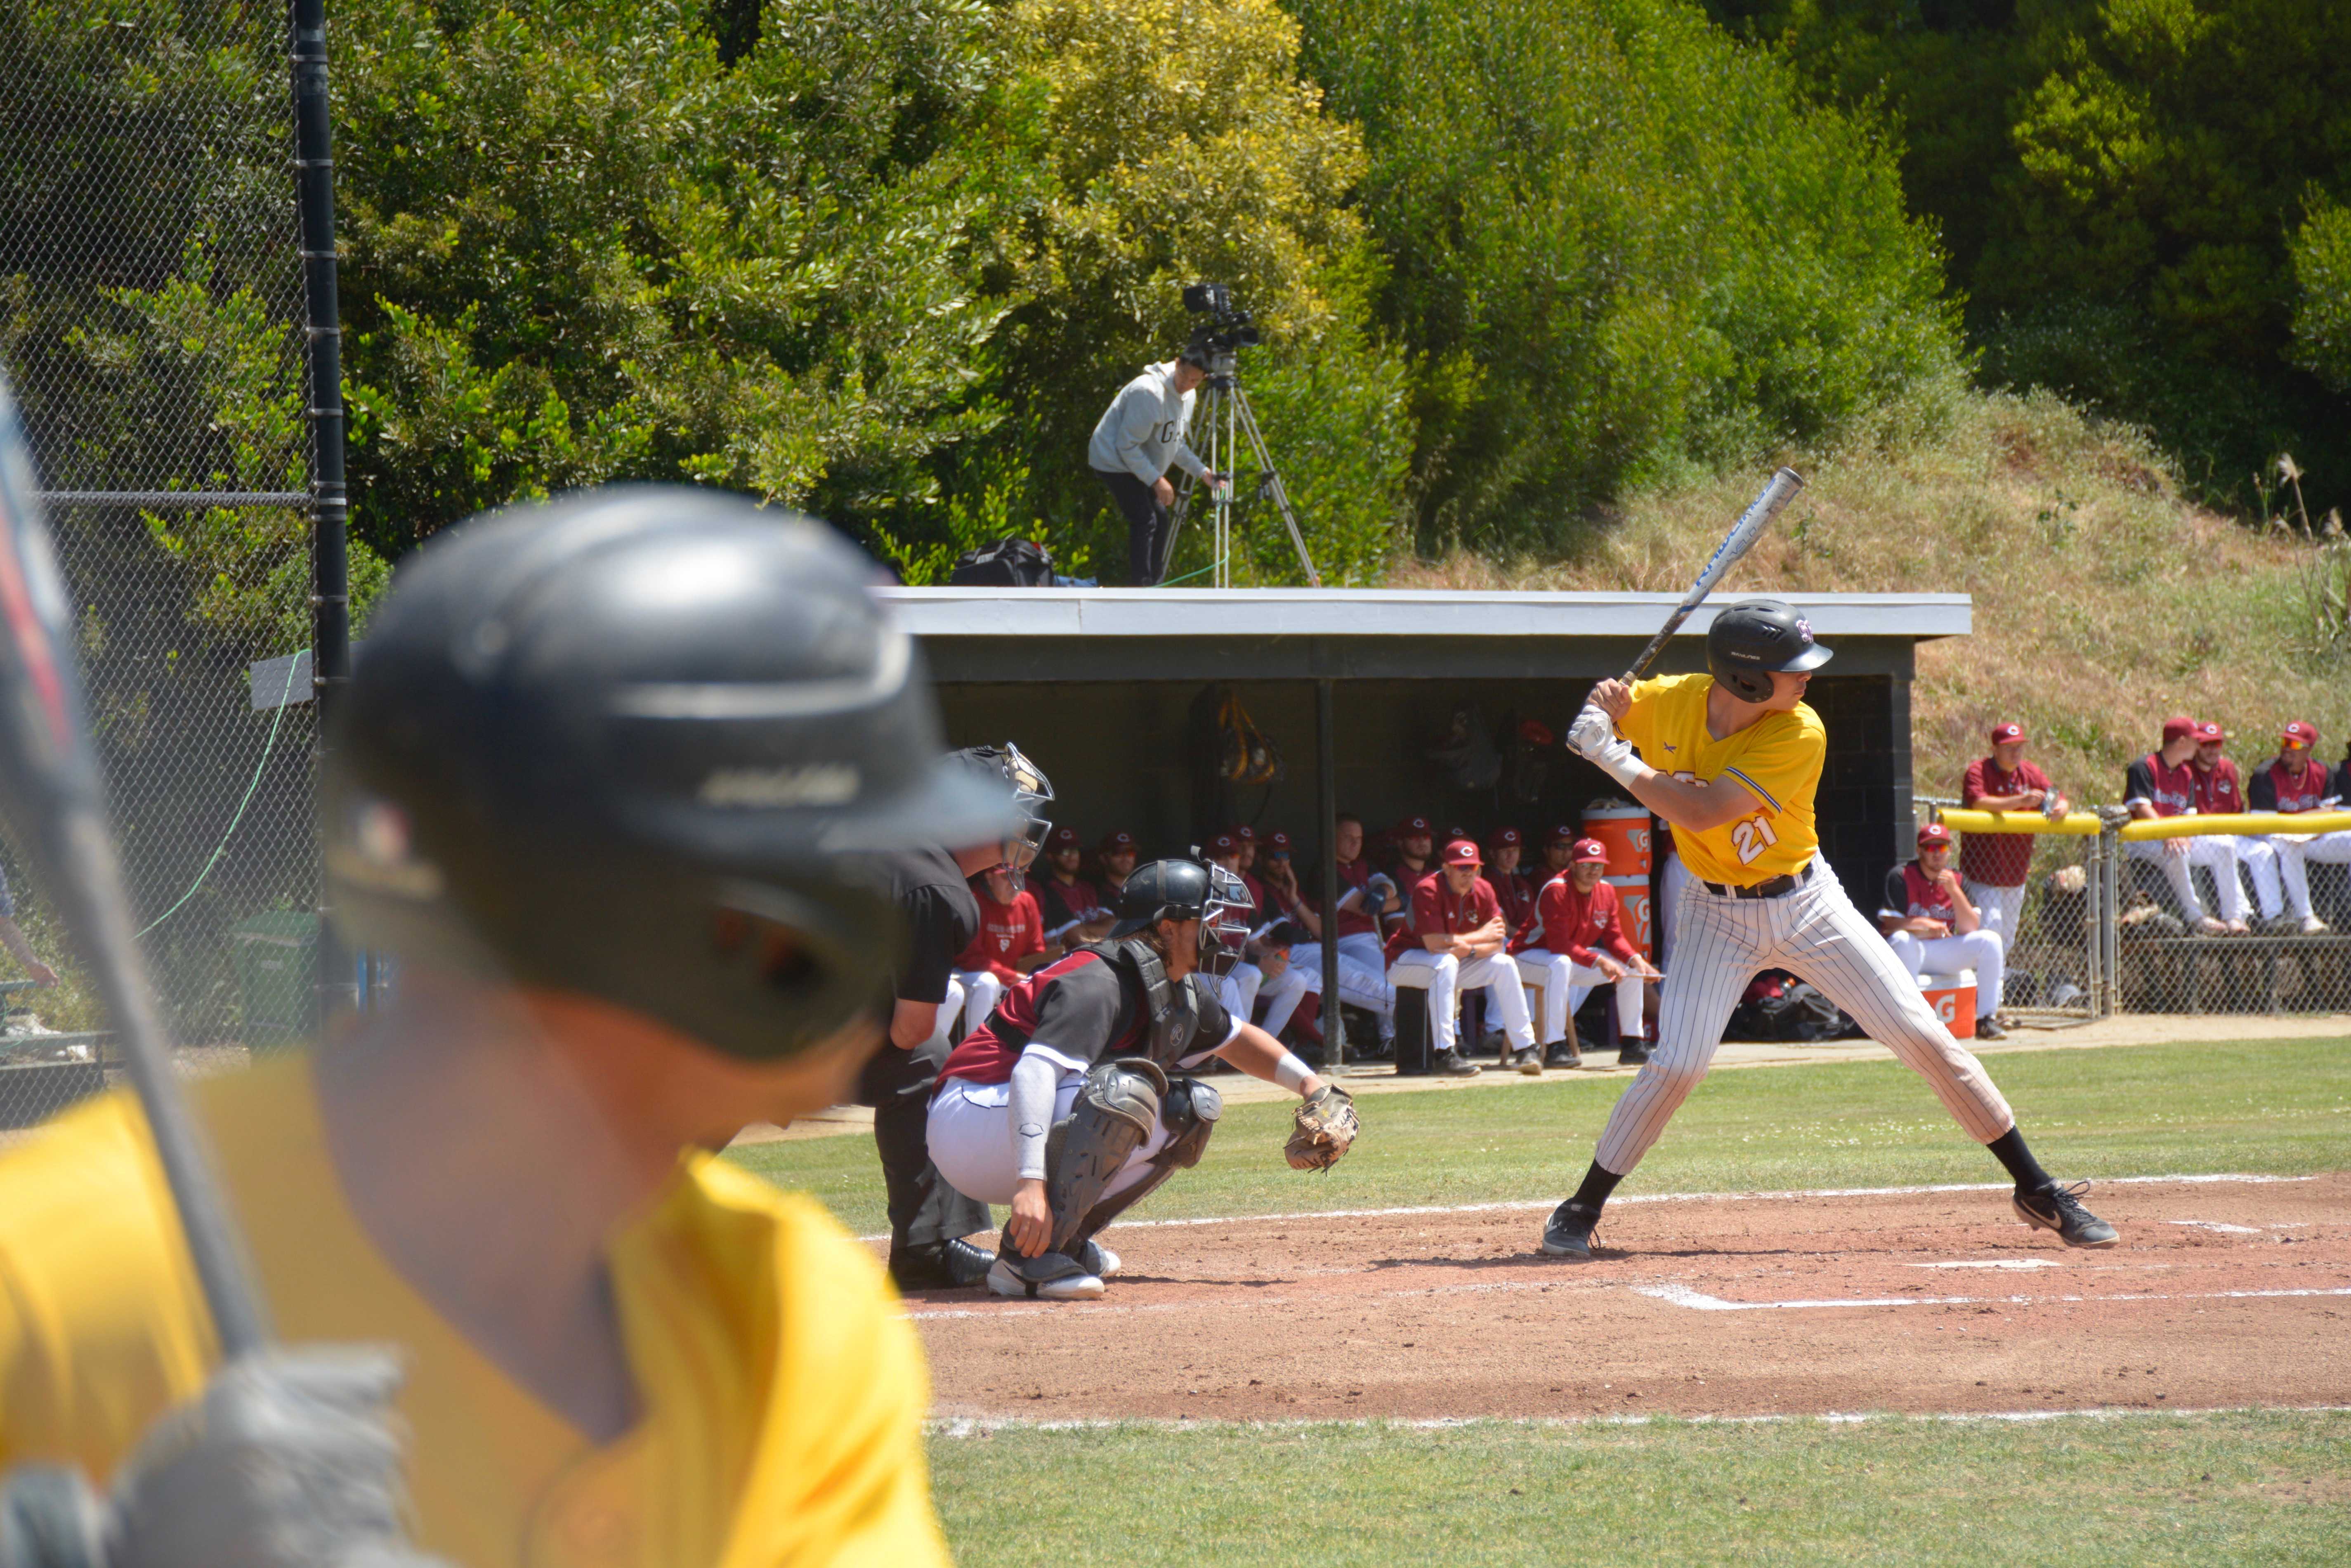 Jason Hare at bat as the SF State baseball team clinched a playoff berth during their doubleheader against Chico State, emphatically winning the first game 12-4 before losing the second game in a nail-biter, 3-2 on Friday, May 3.